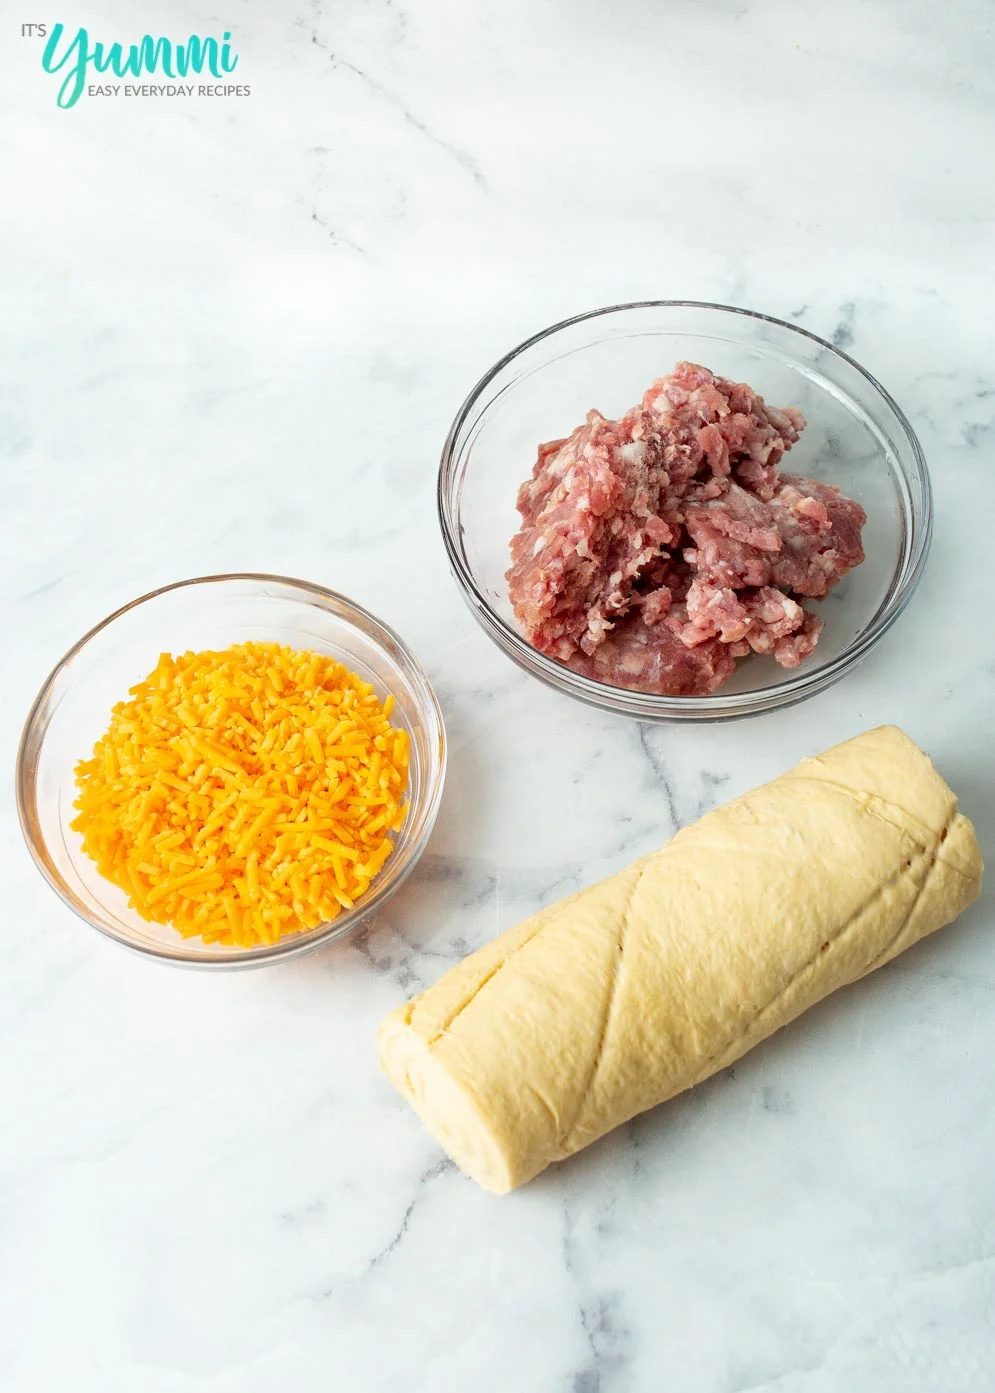 Ingredients for Sausage Biscuits (cheese, sausage and dough)laid out on table